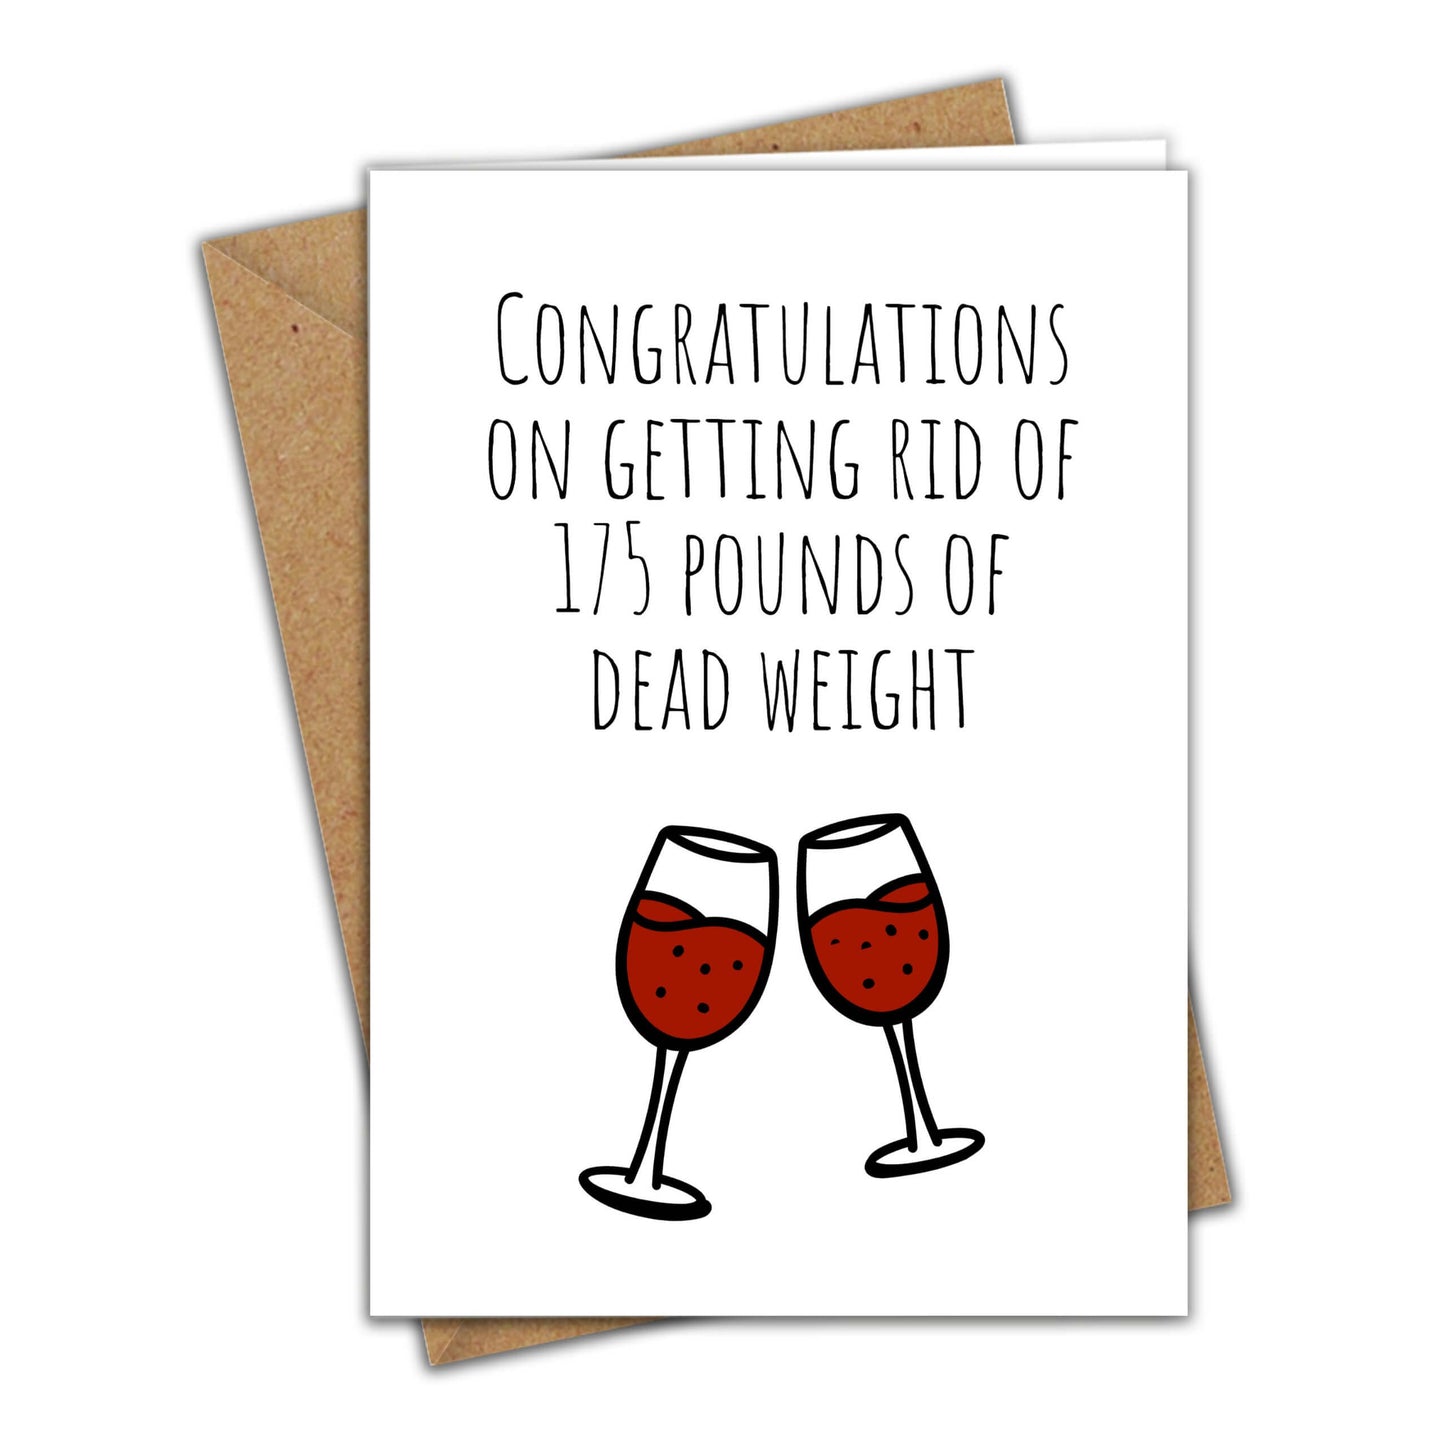 Little Kraken's Congratulations on Getting Rid of 175 Pounds of Dead Weight | Funny Divorce Card | Congratulations on Your Divorce Greeting Card, Divorce Cards for £3.50 each